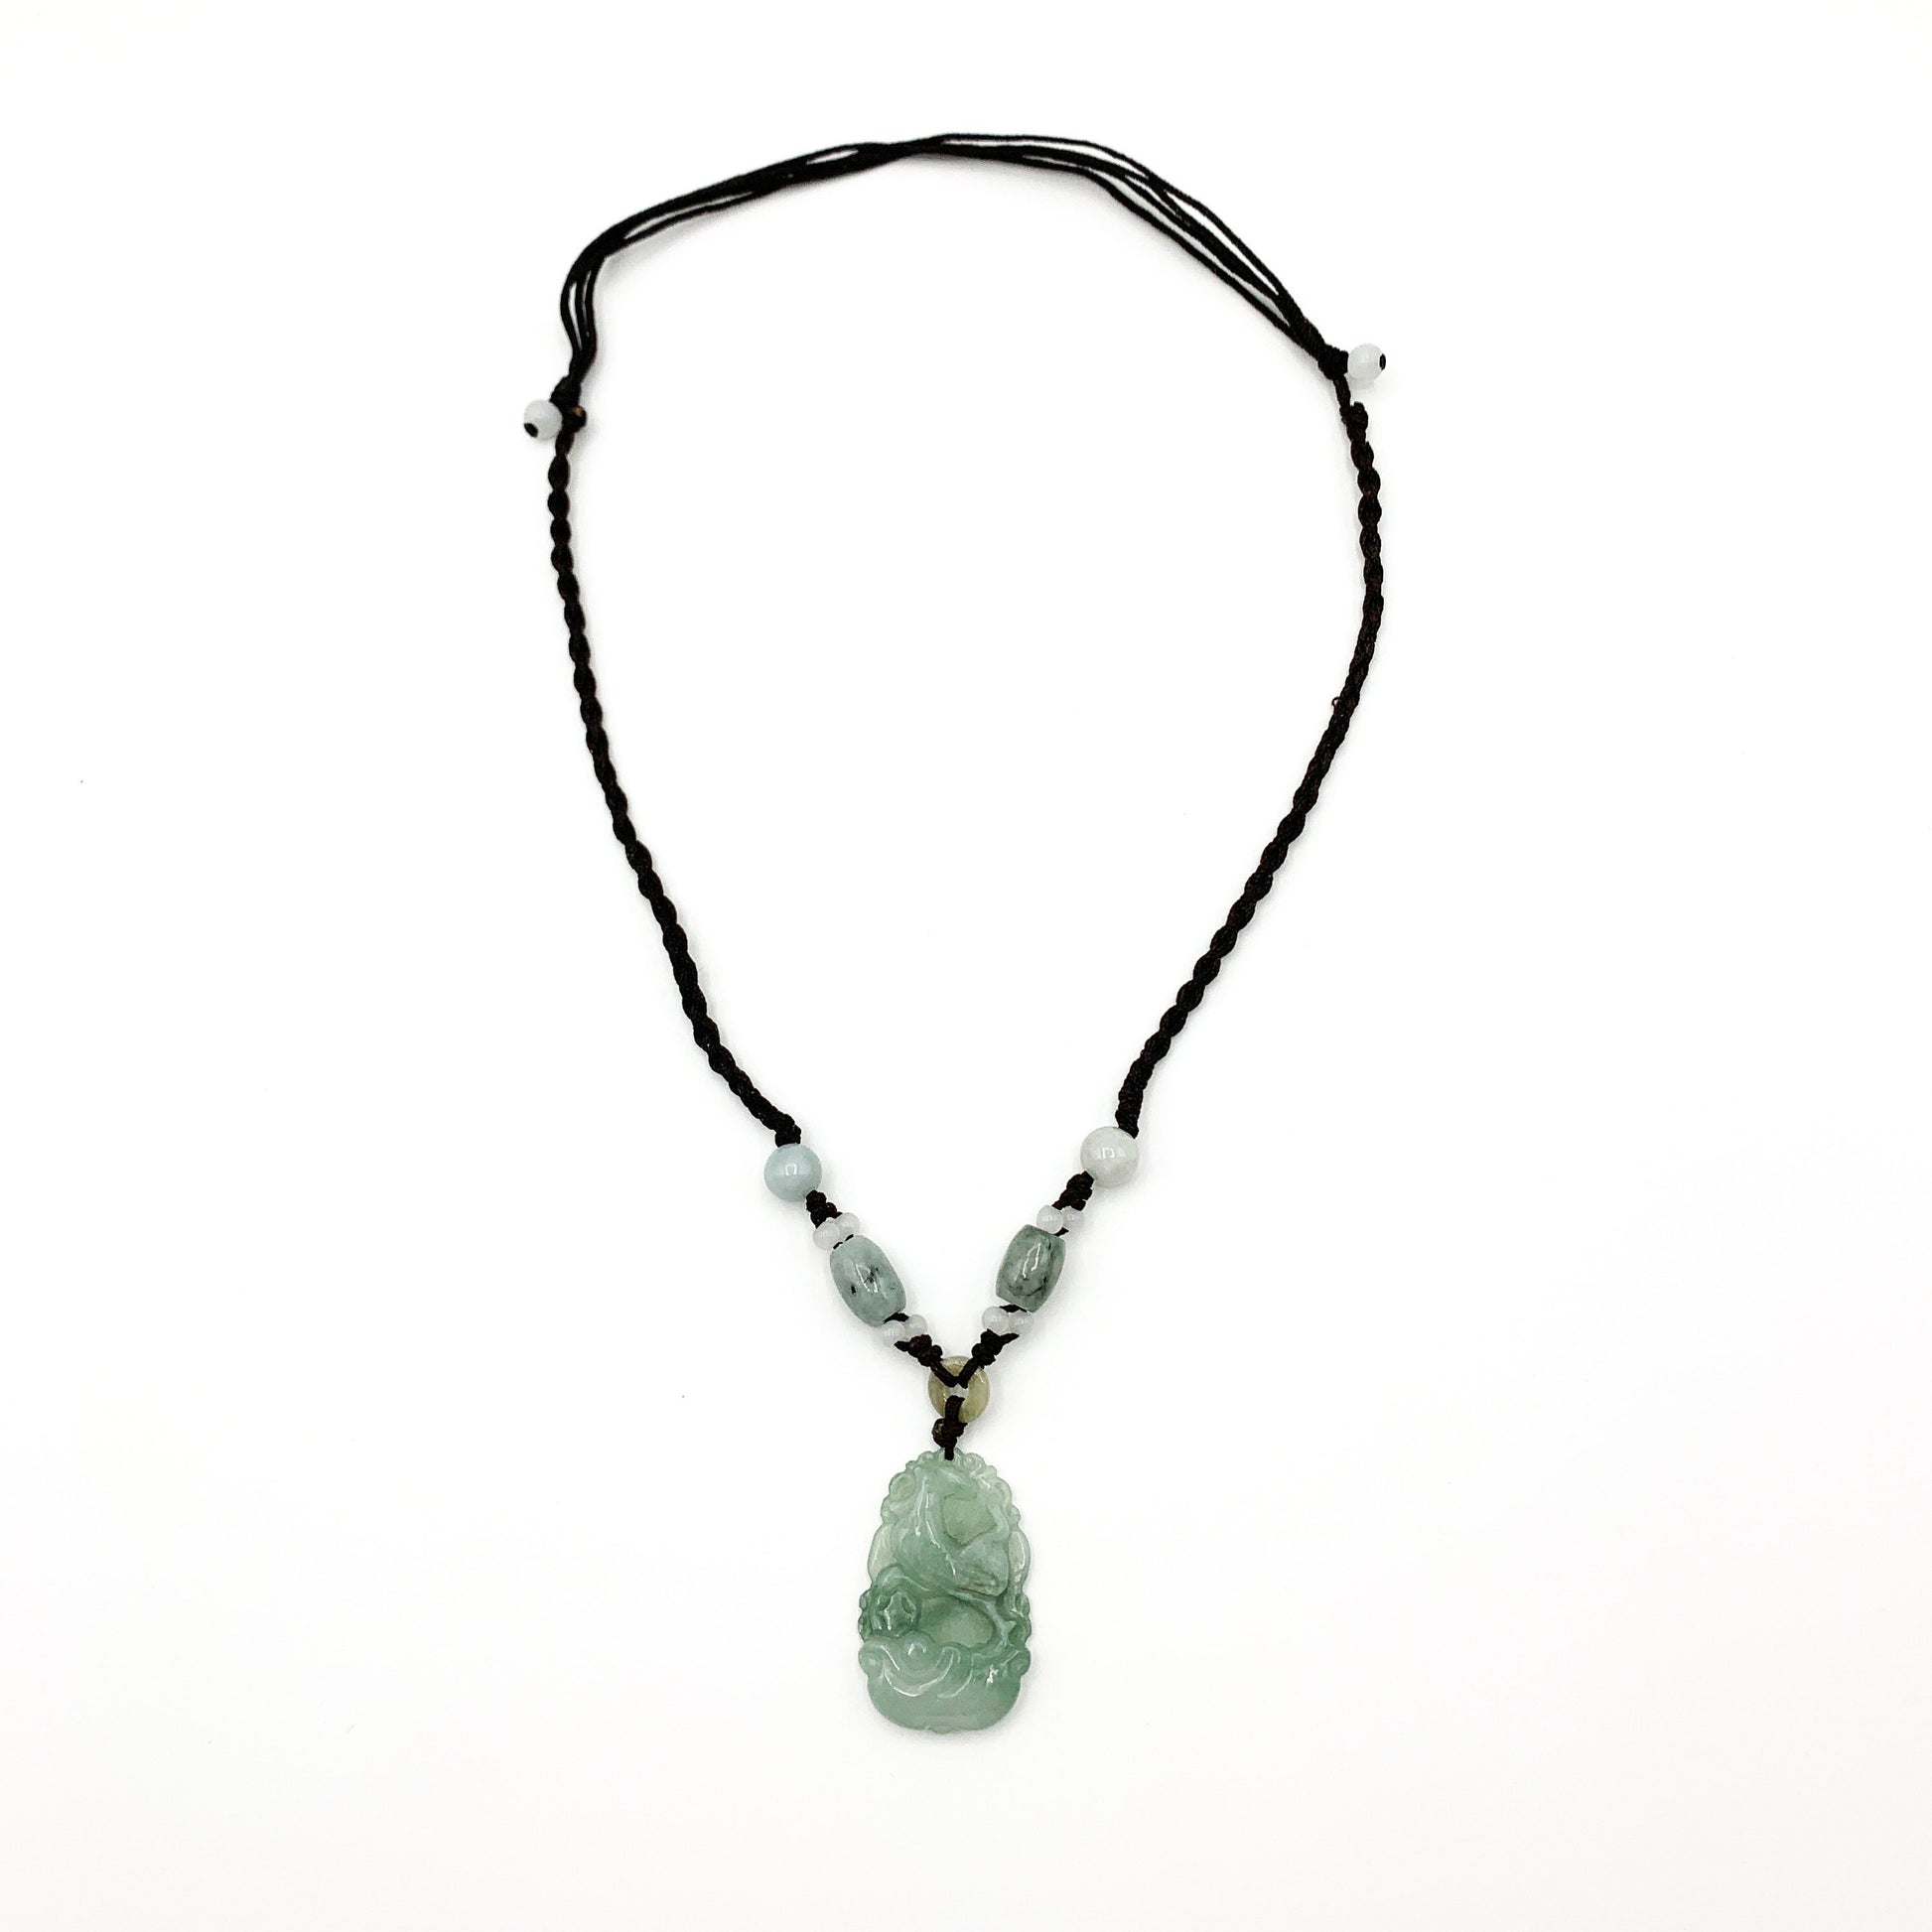 Jadeite Jade Rooster Chicken Chinese Zodiac Carved Rustic Pendant Necklace, YW-0110-1646245863 - AriaDesignCollection